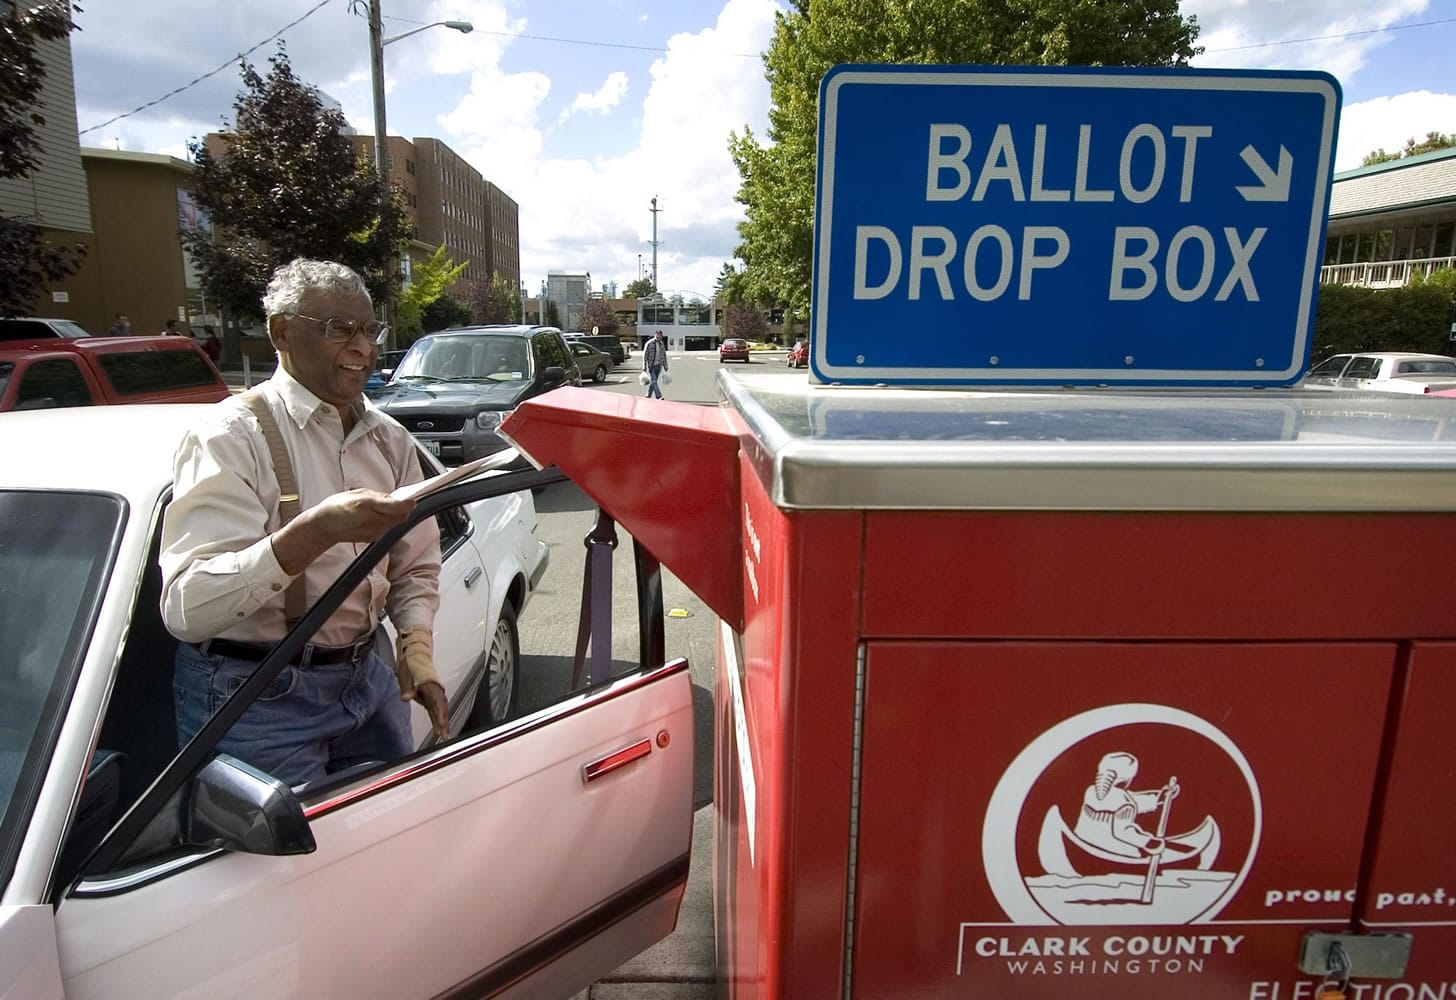 Mailed ballots must be postmarked by Tuesday; drop-off ballots must be received by 8 p.m.